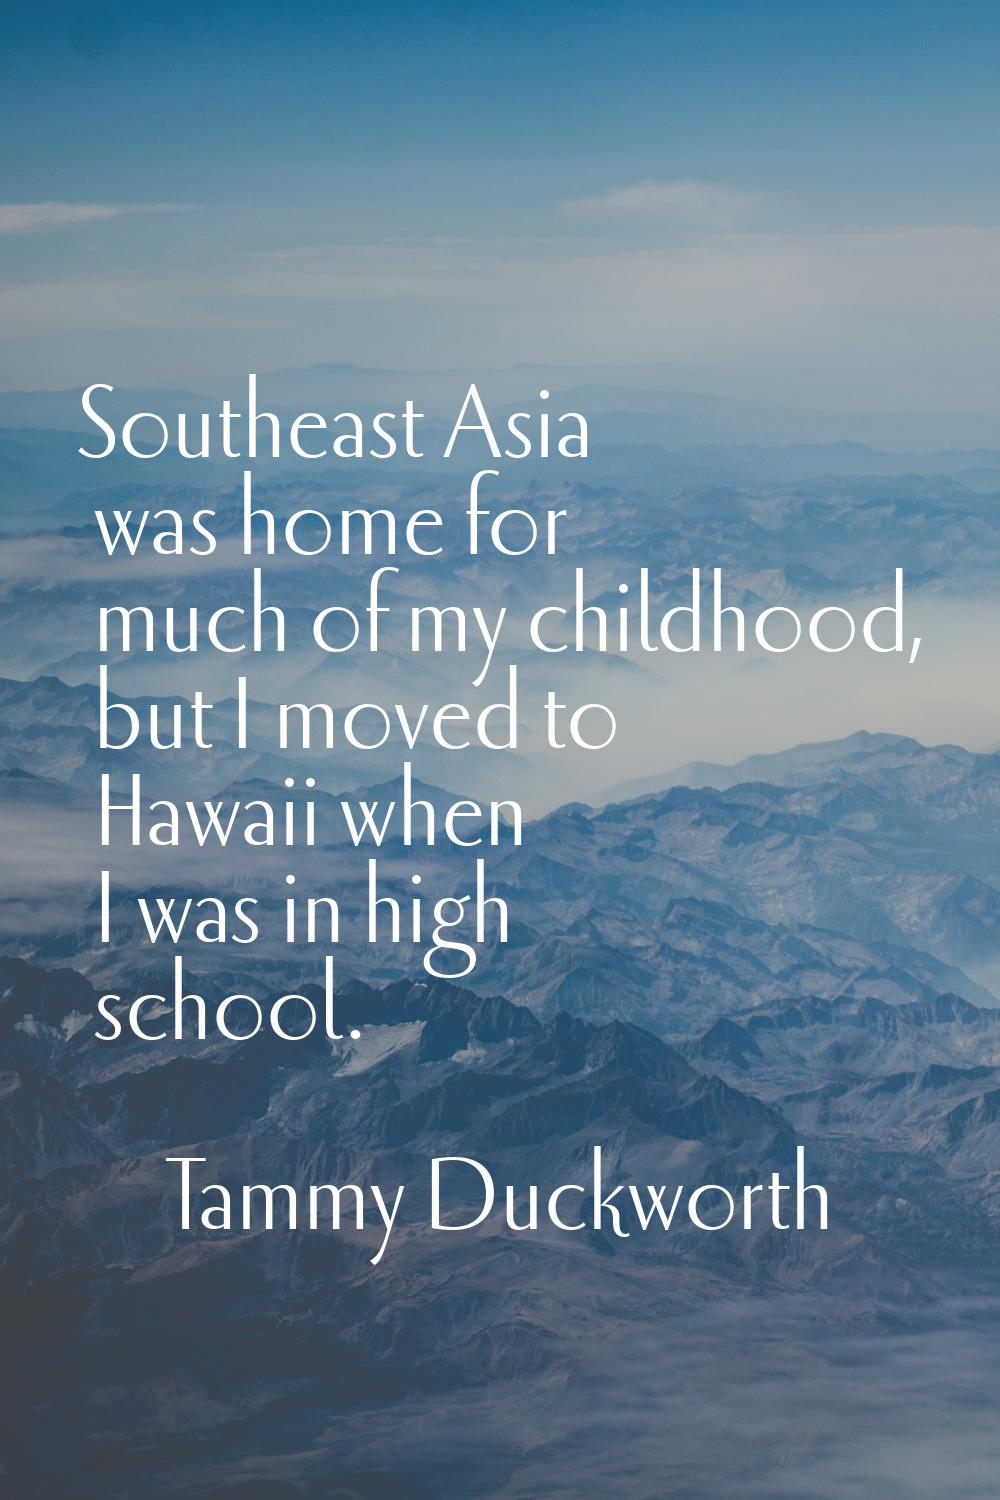 Southeast Asia was home for much of my childhood, but I moved to Hawaii when I was in high school.